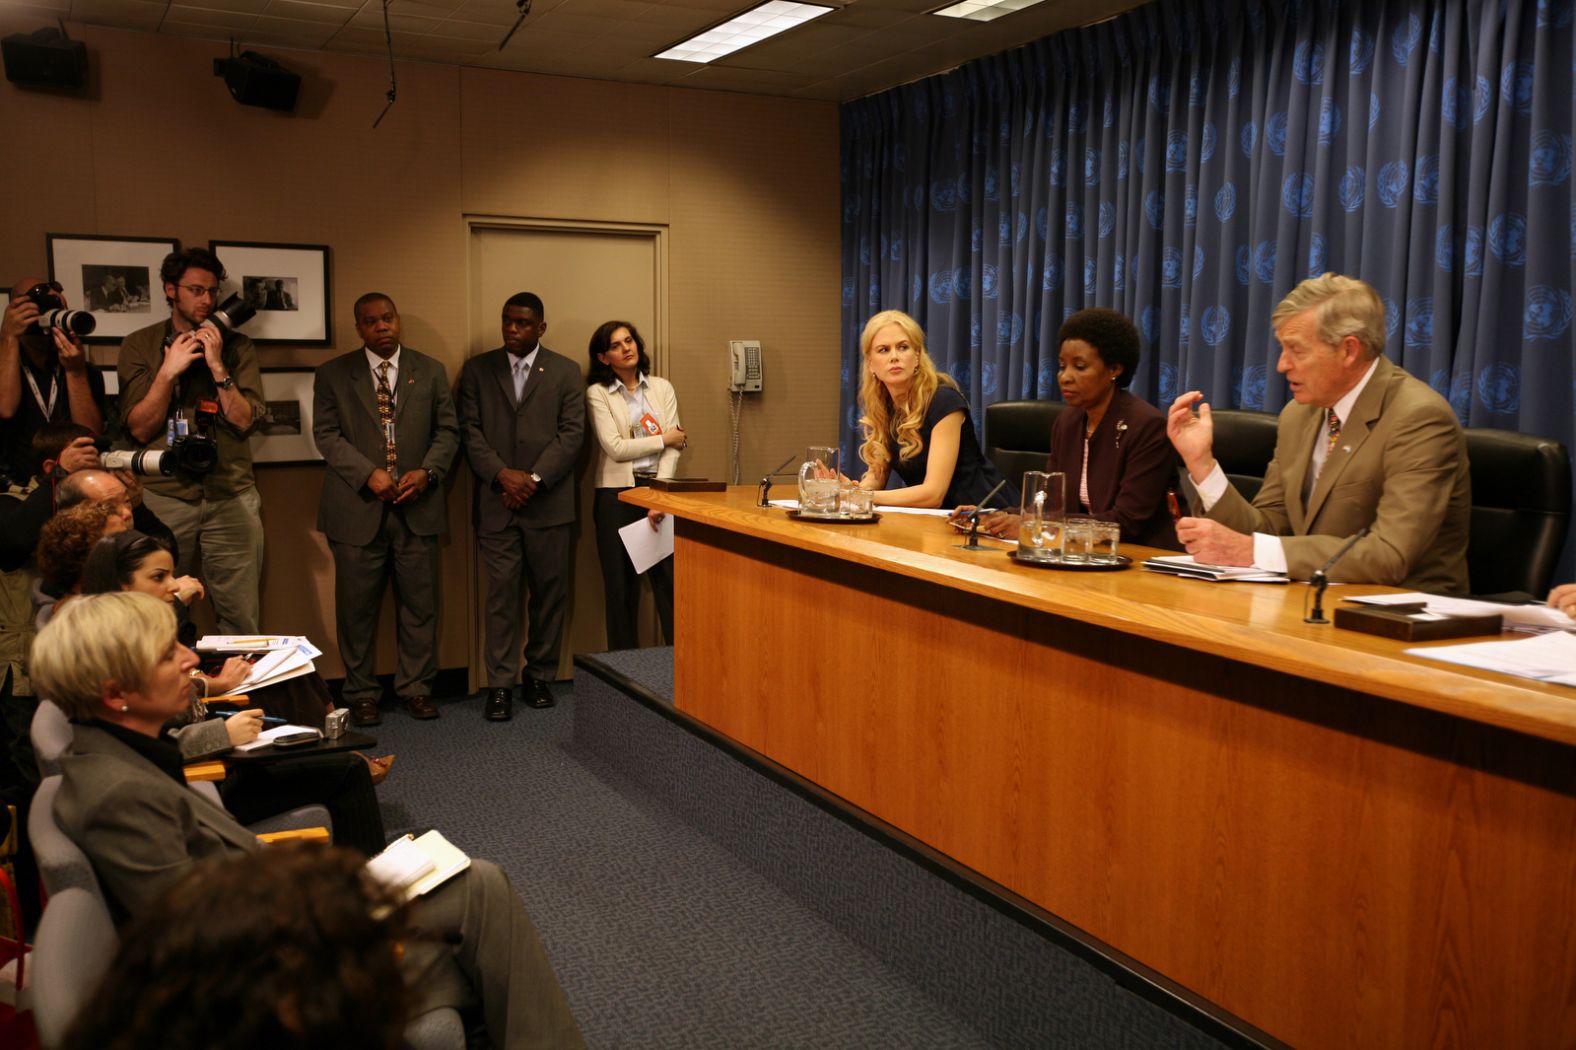 Kidman joins Asha-Rose Migiro, deputy secretary-general of the United Nations, and Tim Worth, president of the UN Foundation, at a news conference in New York in 2008. Kidman, acting as a goodwill ambassador for the United Nations Development Fund for Women, encouraged the signing of an online petition to support the elimination of violence against women.